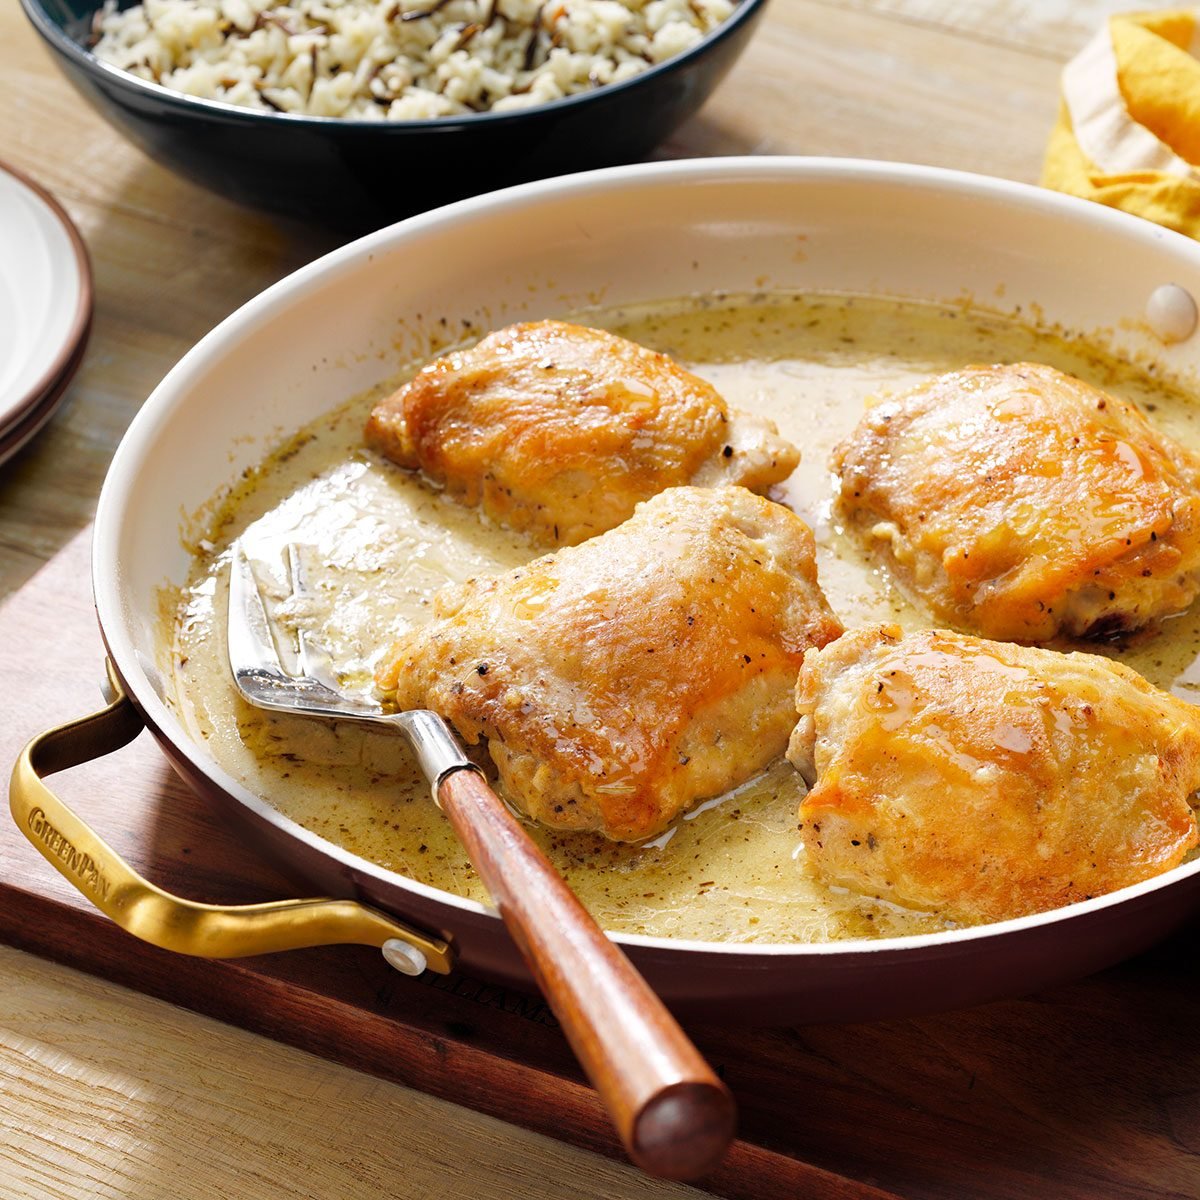 Creamy Smothered Chicken Thighs Cooked by Julie + video